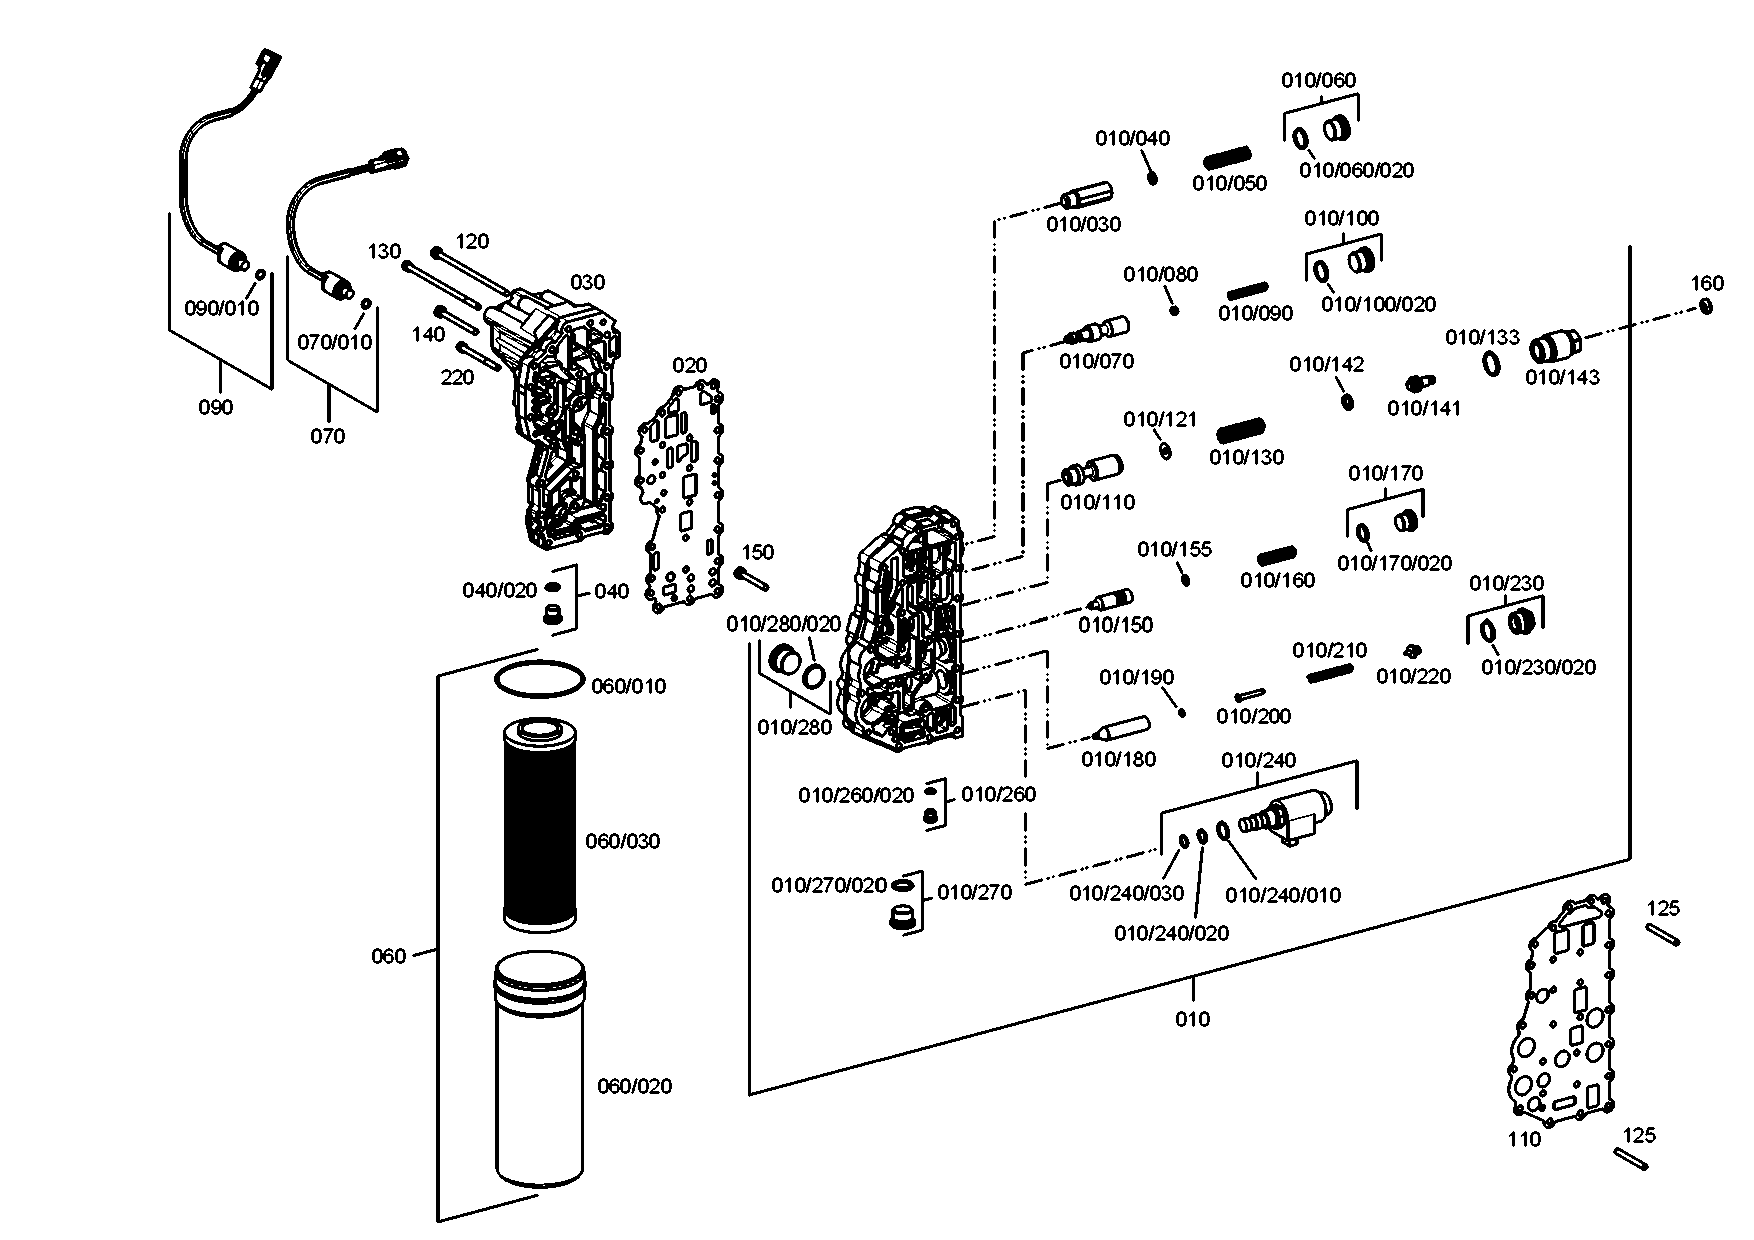 drawing for AGCO F824101470020 - SOLENOID VALVE (figure 4)